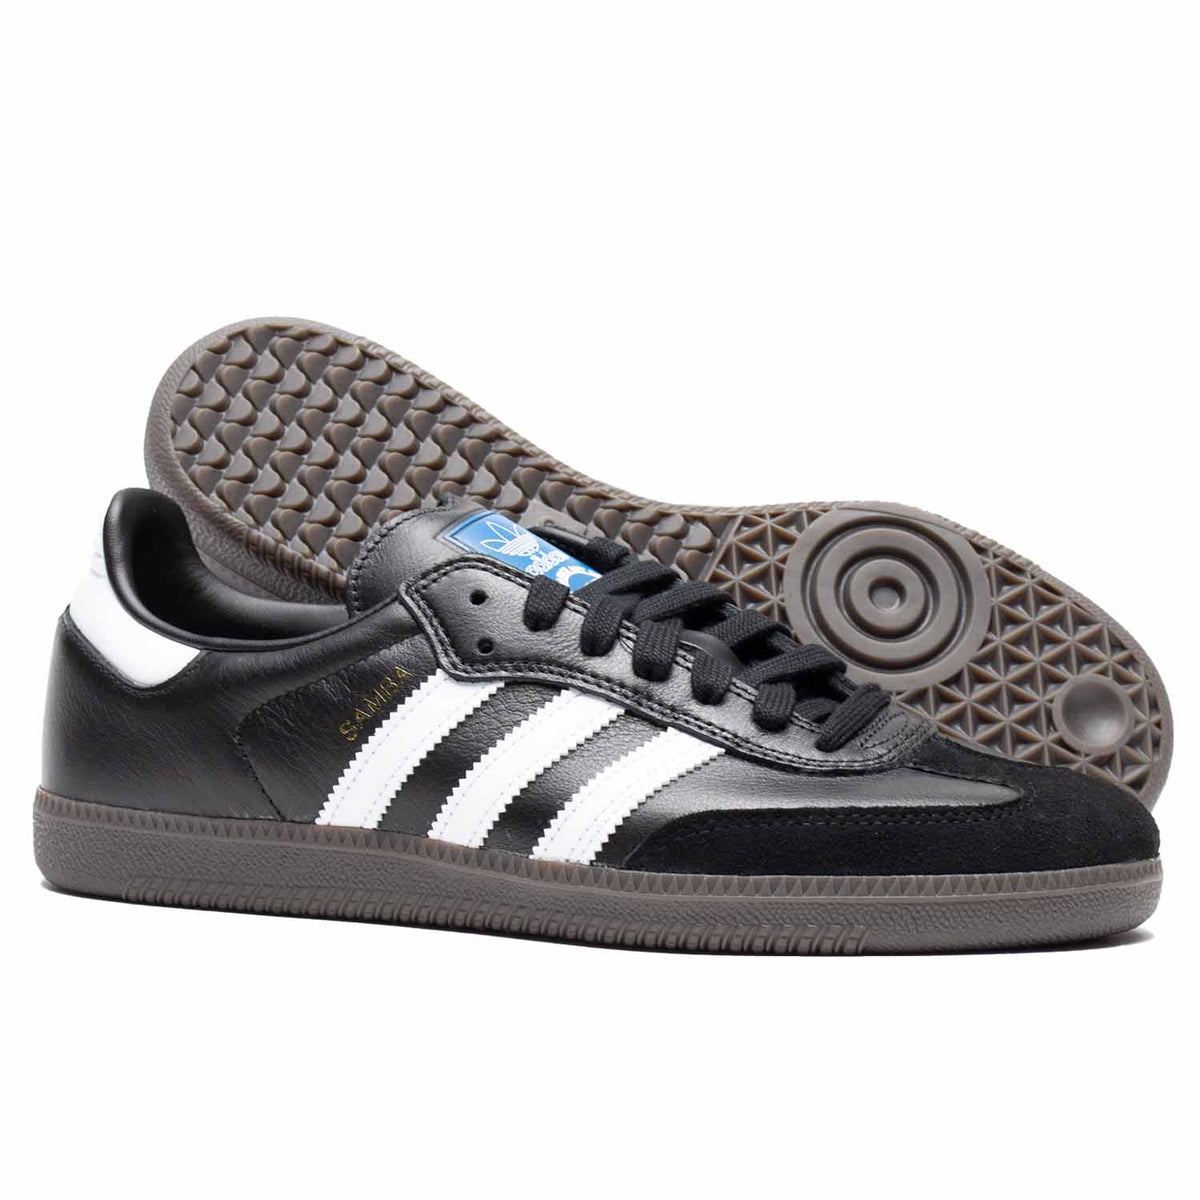 Black leather Adidas skateboarding shoe with white leather stripes and brown rubber sole. Suede toe cap.